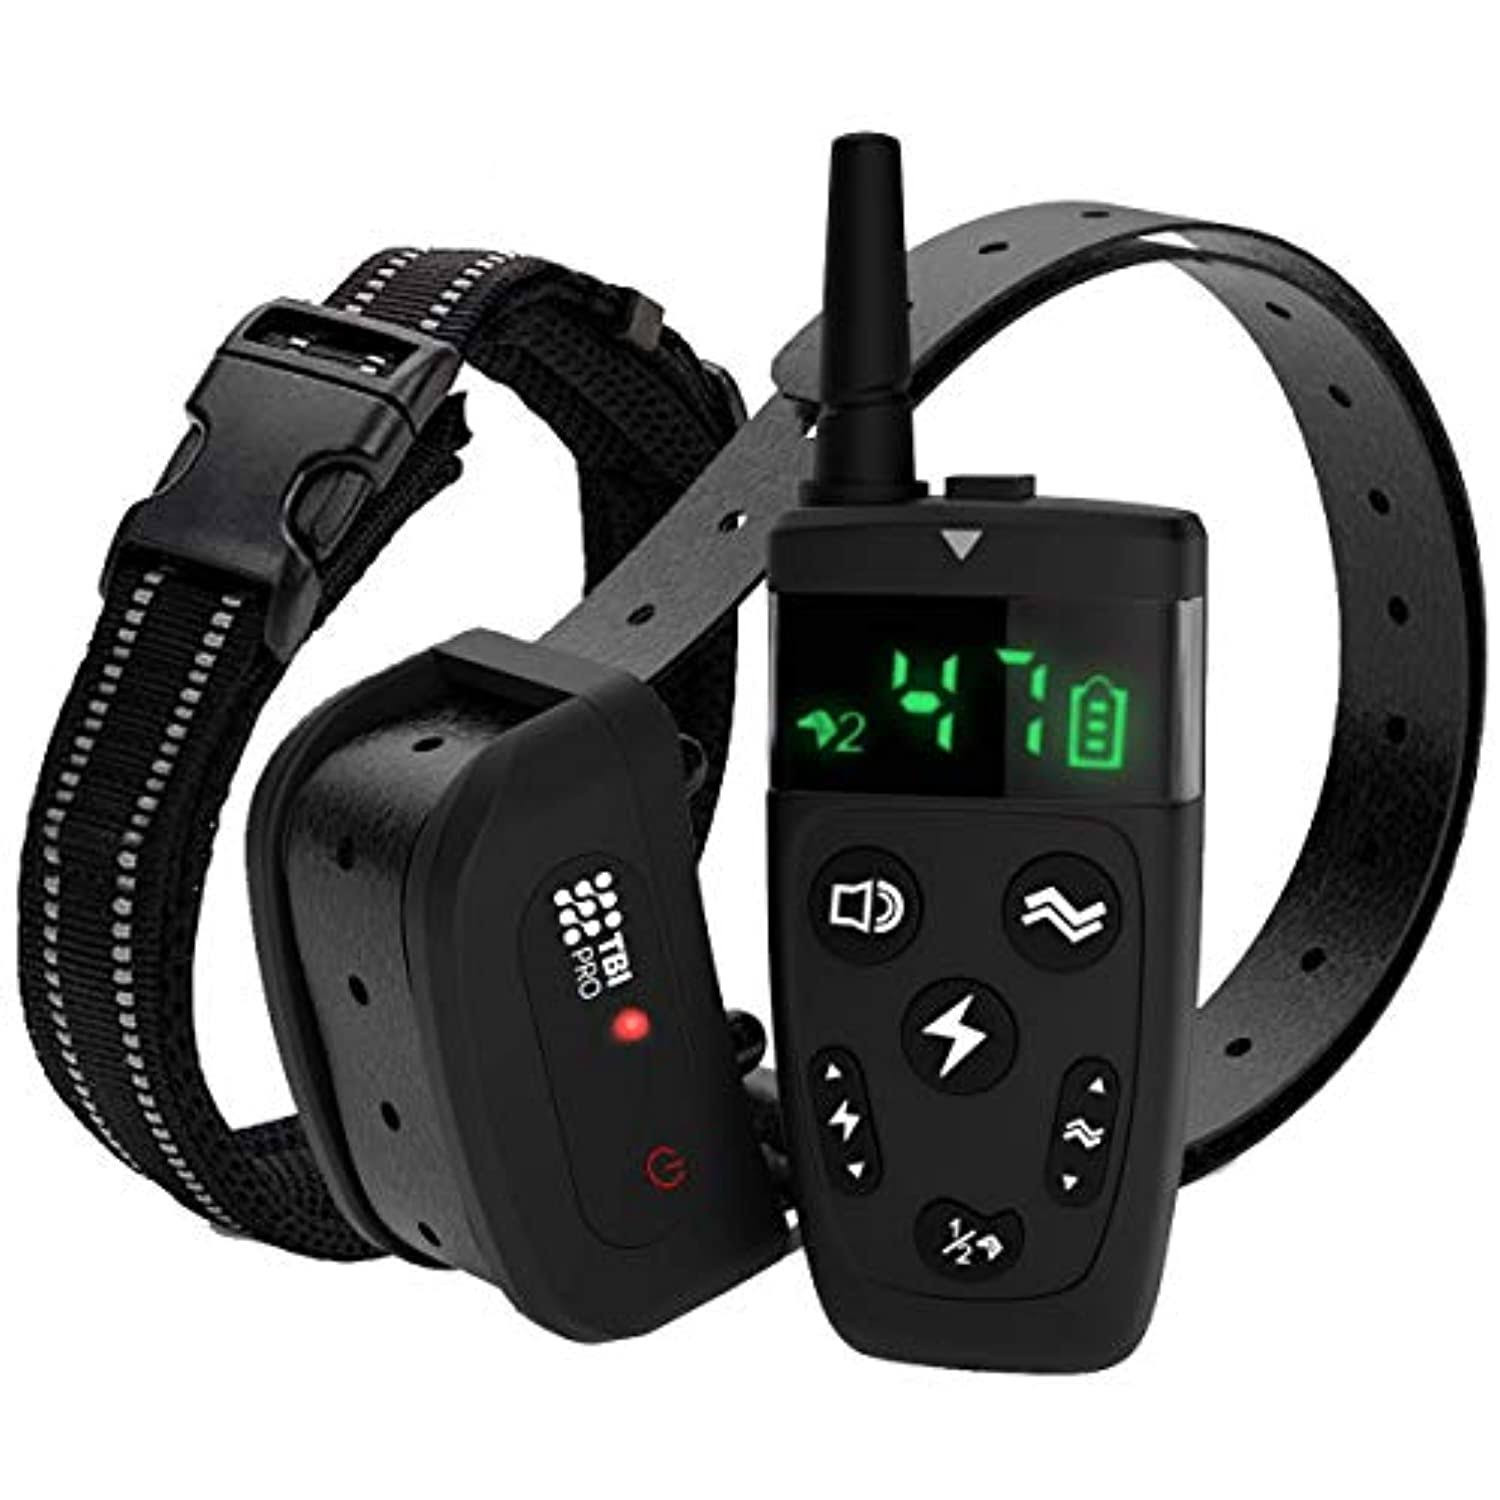 TBI Pro Dog Training Collar with Remote - Shock Collar for Dogs Range ...